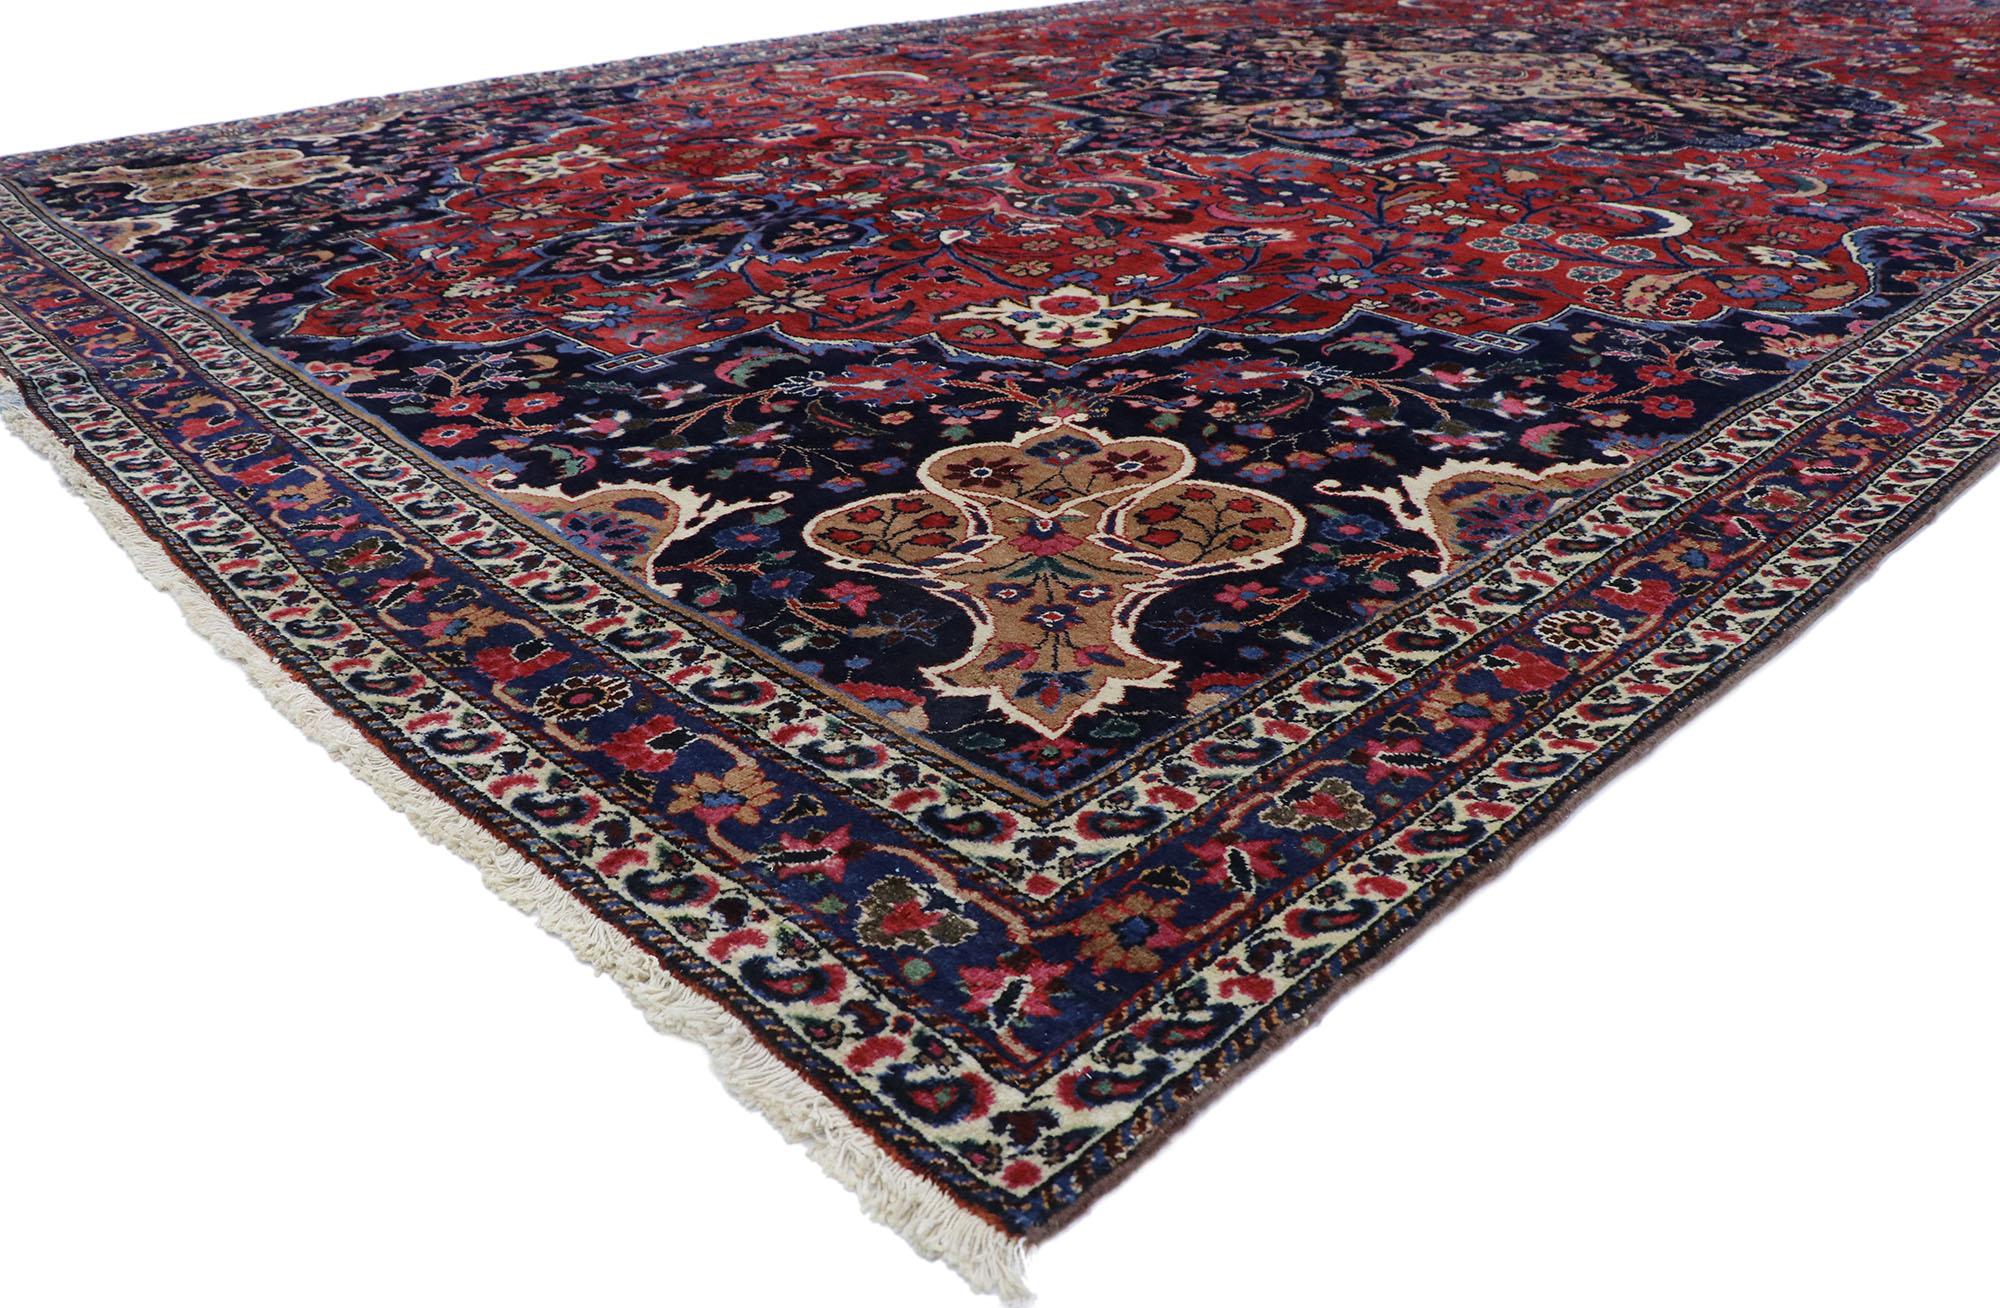 77748 Antique Persian Mashhad rug with Baroque Victorian Style 10'06 x 19'07. Ravishing and vibrant this hand knotted wool antique Persian Mashhad area rug features an elaborate cusped palmette medallion anchored with palmette pendants at either end